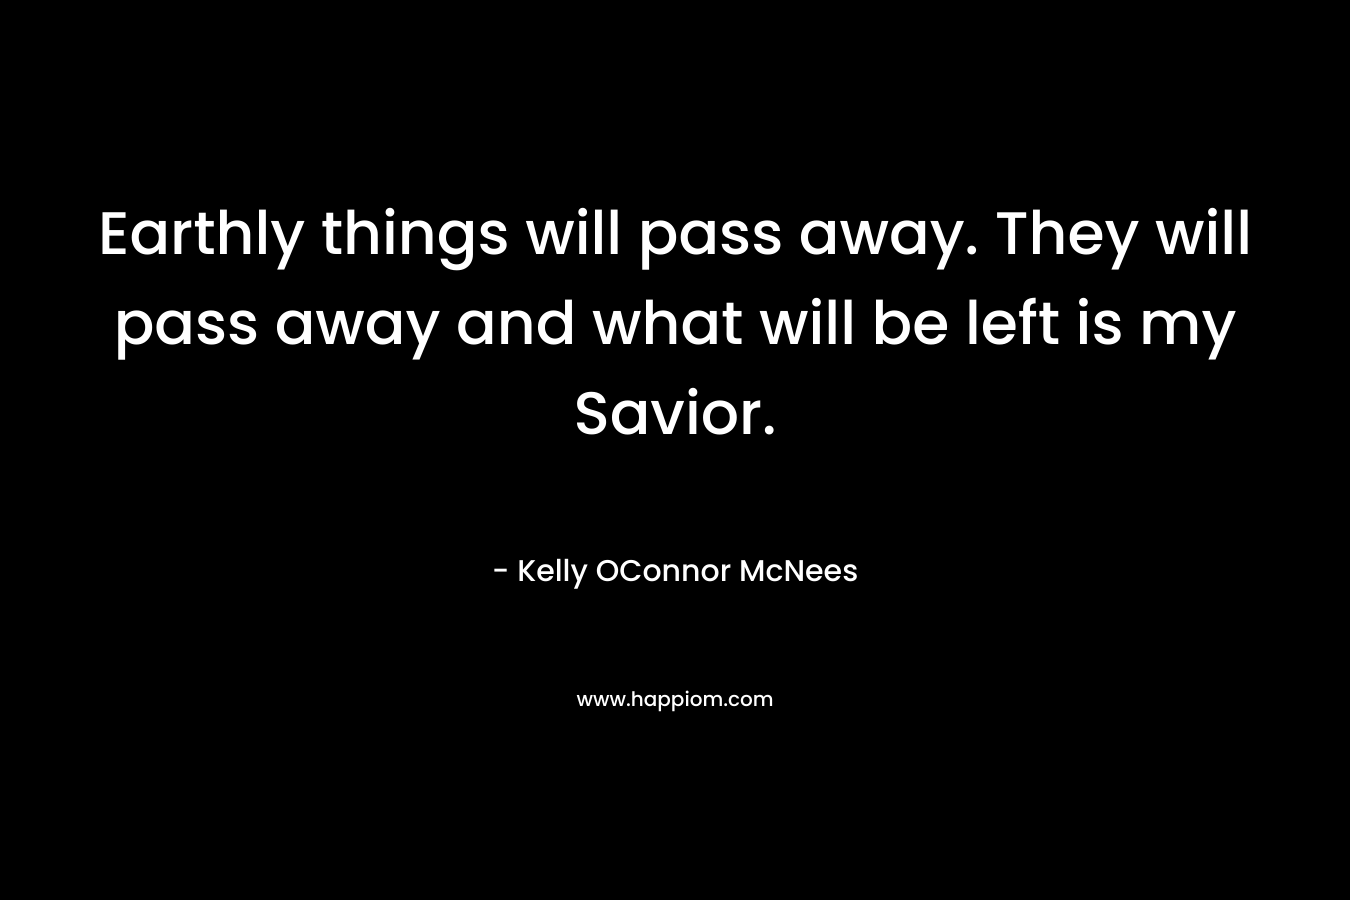 Earthly things will pass away. They will pass away and what will be left is my Savior. – Kelly OConnor McNees